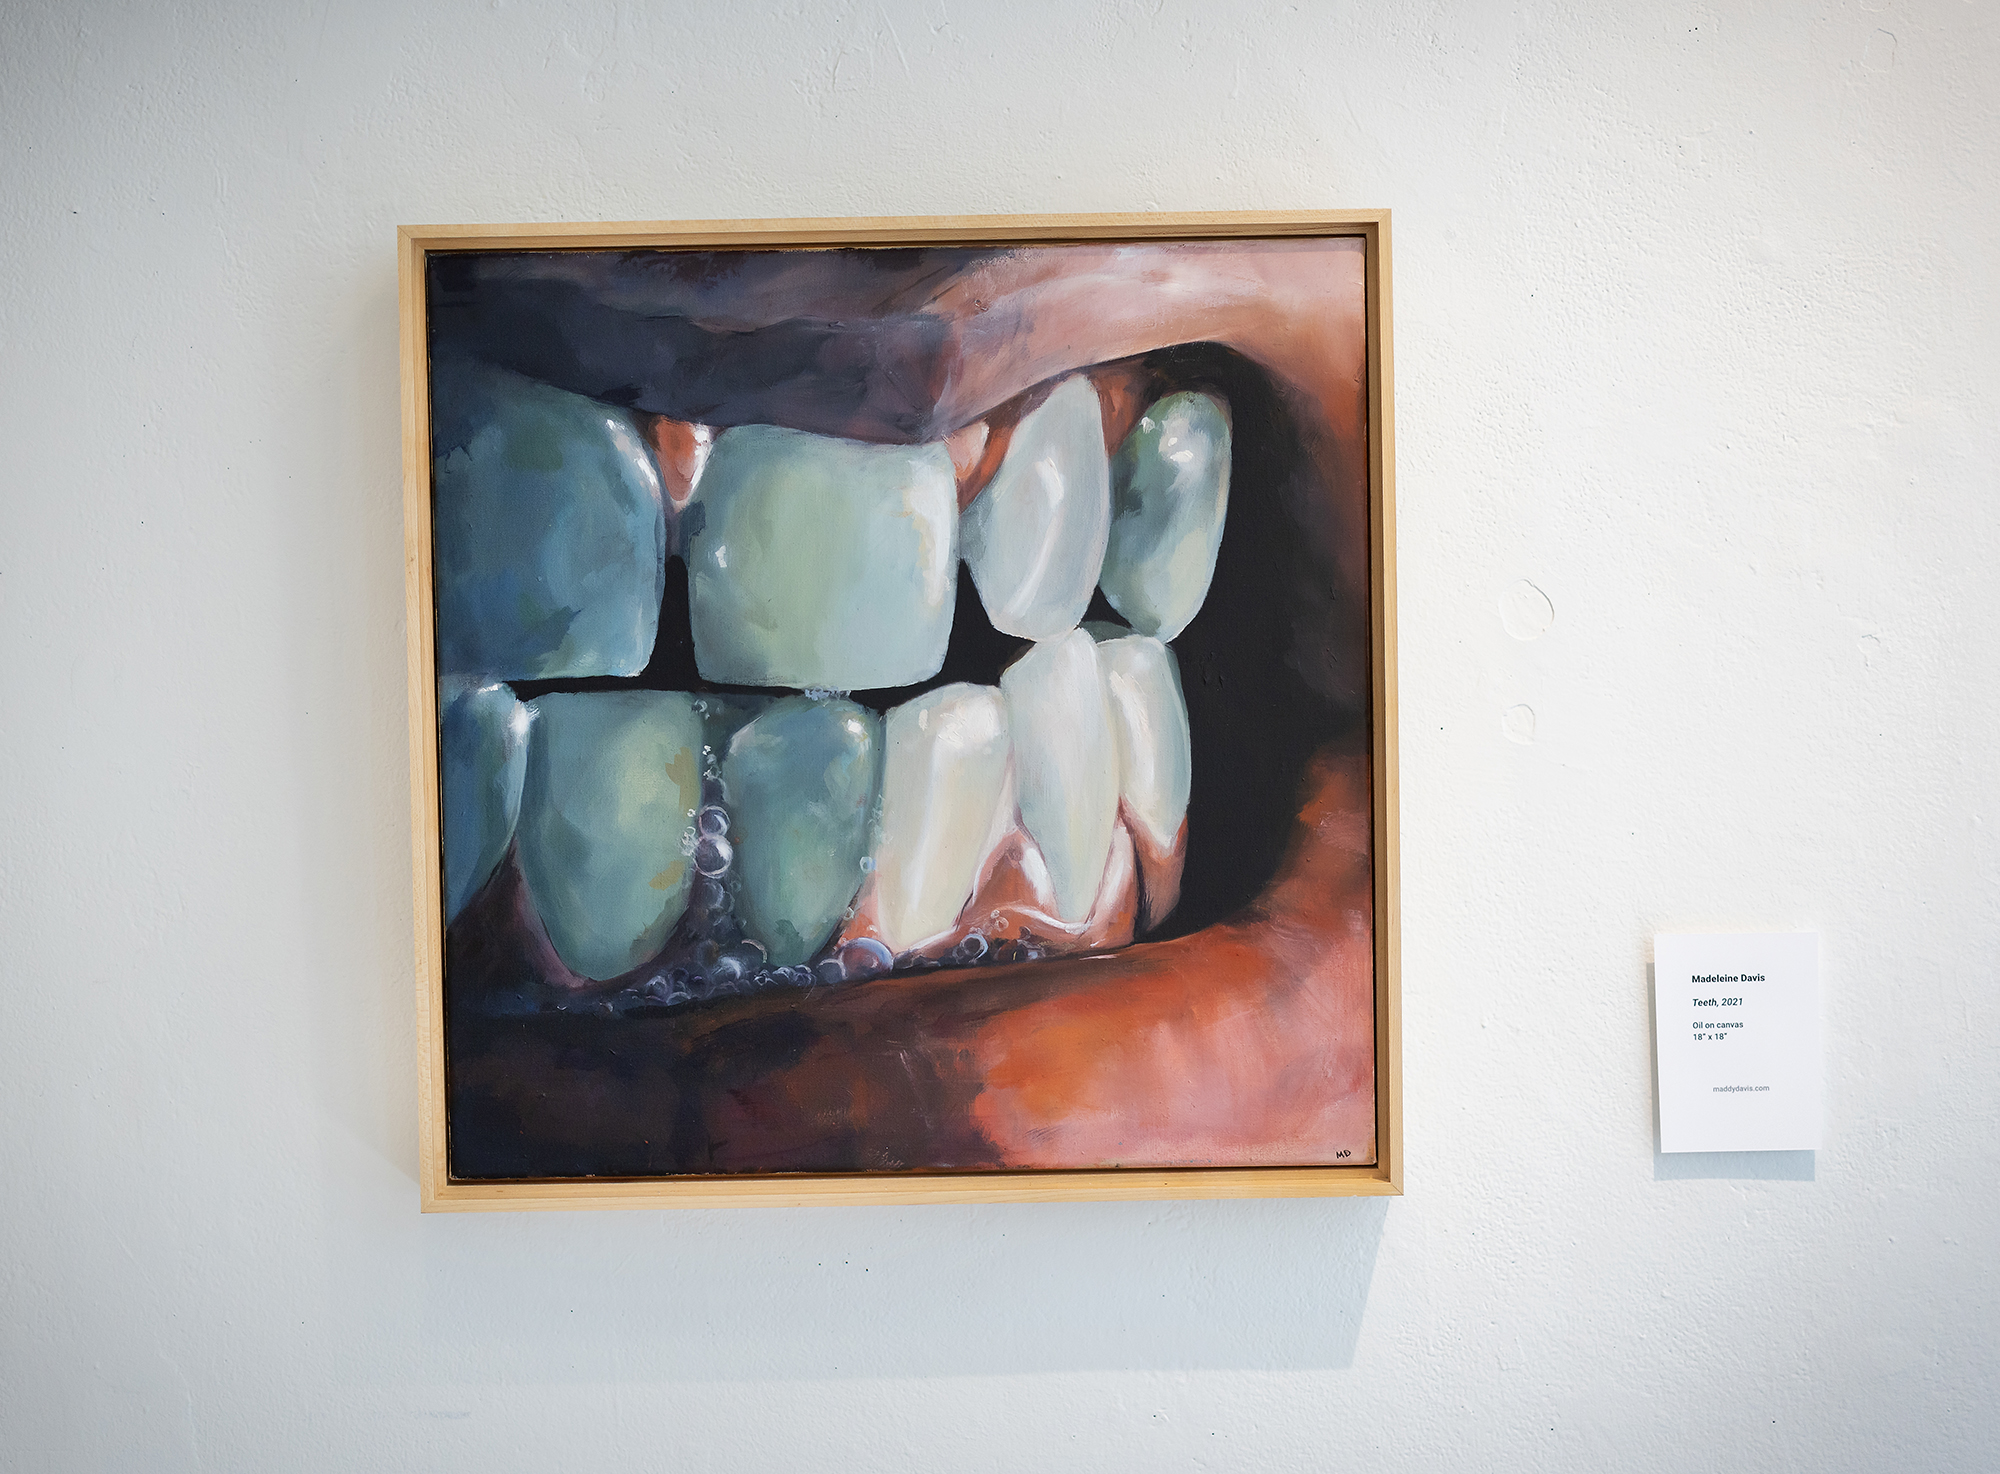 artwork depicting a closeup of clenched teeth